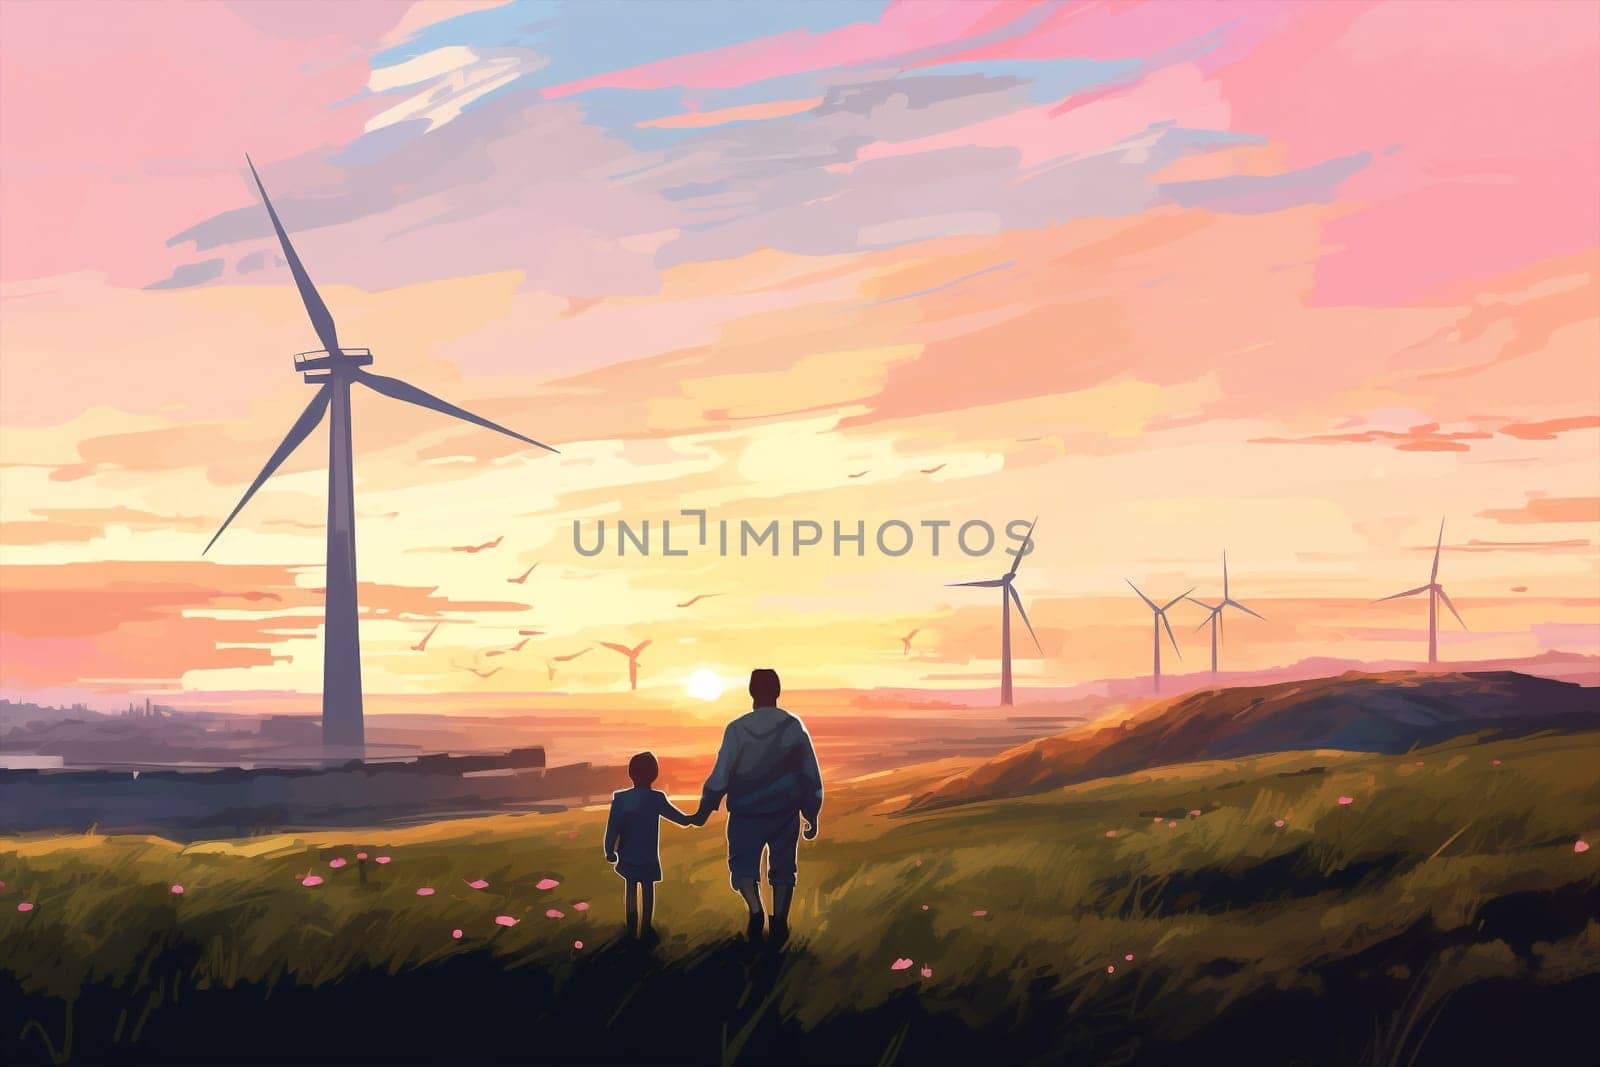 Summer together nature childhood love happy sky daughter lifestyle happiness electricity cheerful sunset beautiful father turbine fun family freedom